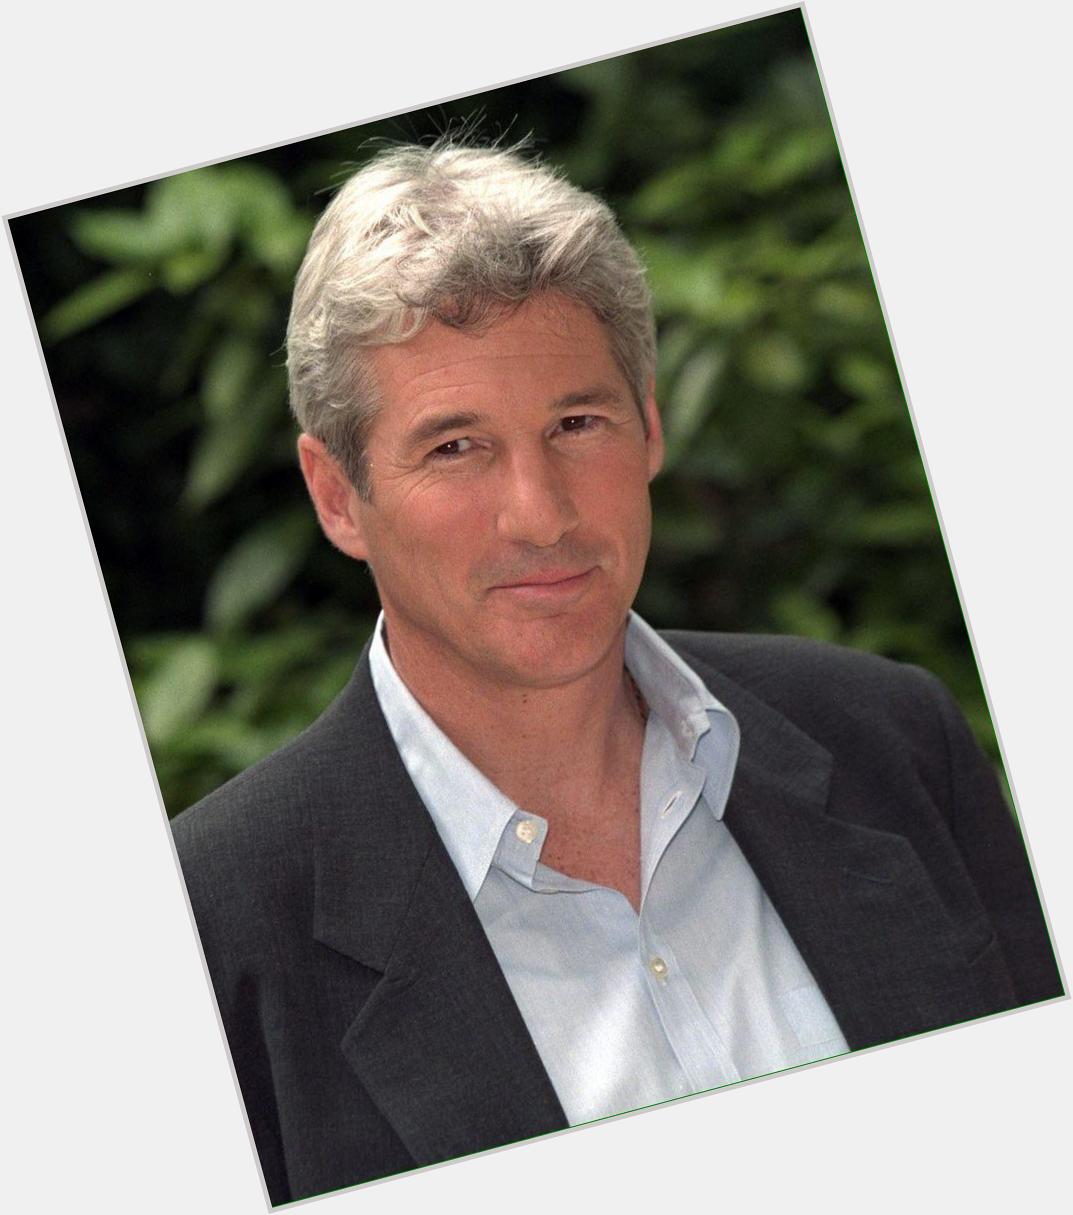   Happy 66th Birthday to handsome and talented Richard Gere. Quite a career.  Wow he makes 66 hot!